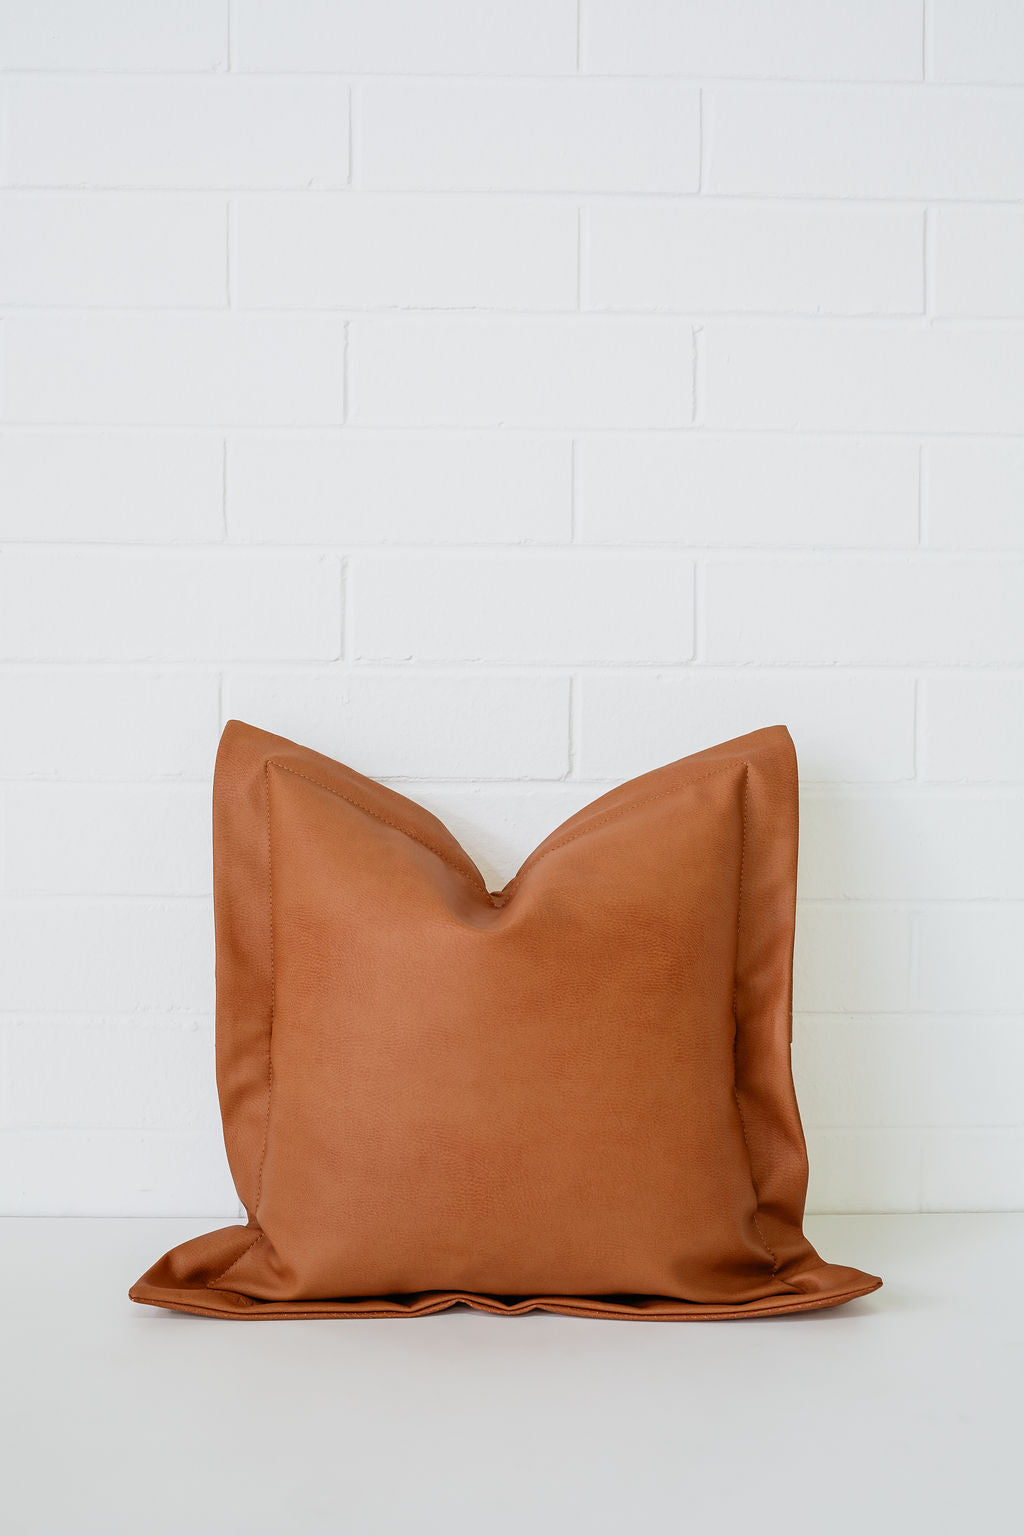 SECONDS SALE - Imperfect Cushion covers